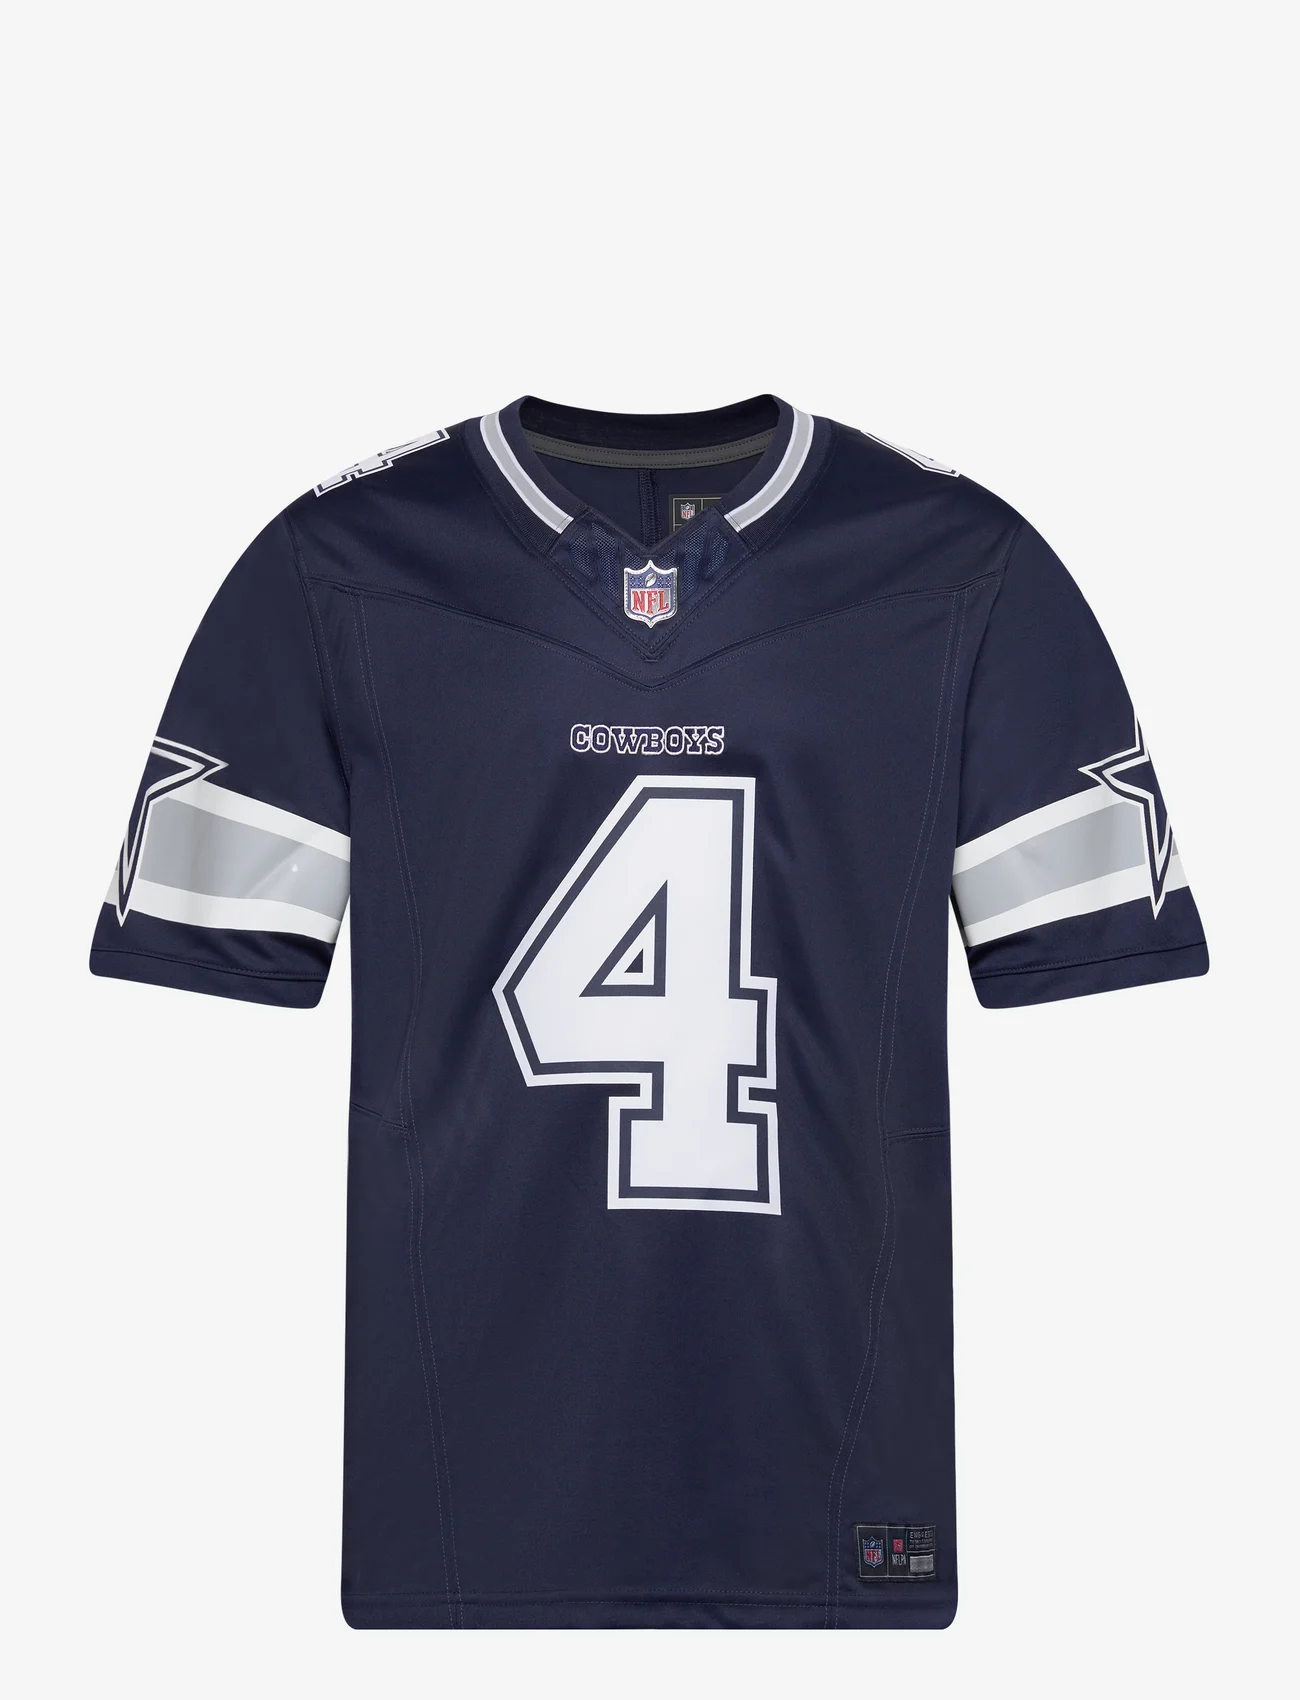 NIKE Fan Gear - Nike NFL Dallas Cowboys Limited Jersey - short-sleeved t-shirts - college navy - 0